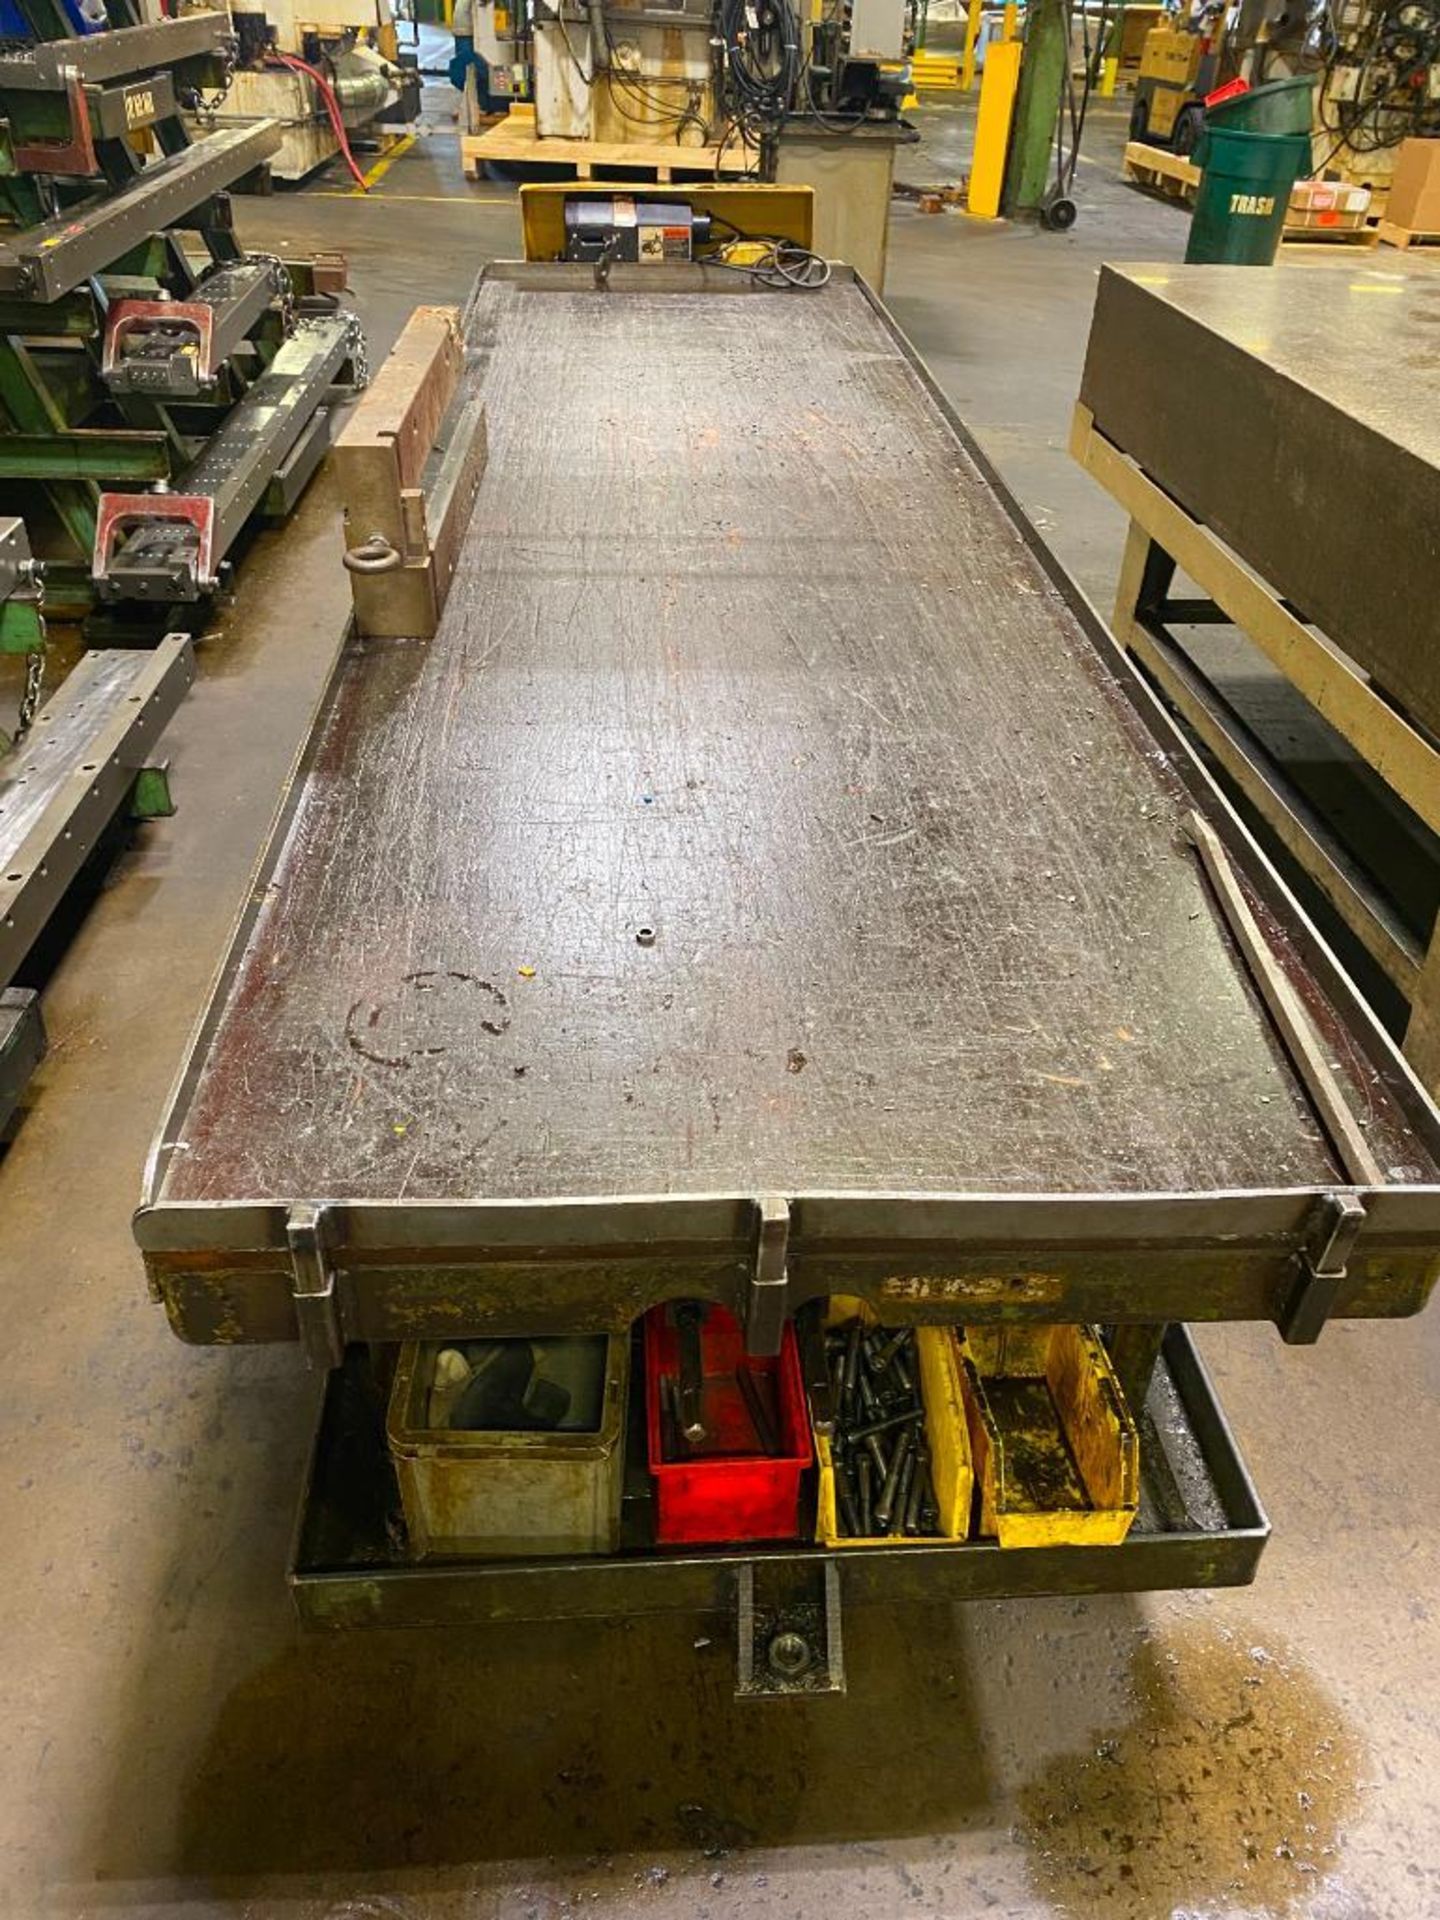 Superwinch Sac1000 Lift Table, 11'-4" X 3' - Image 3 of 3